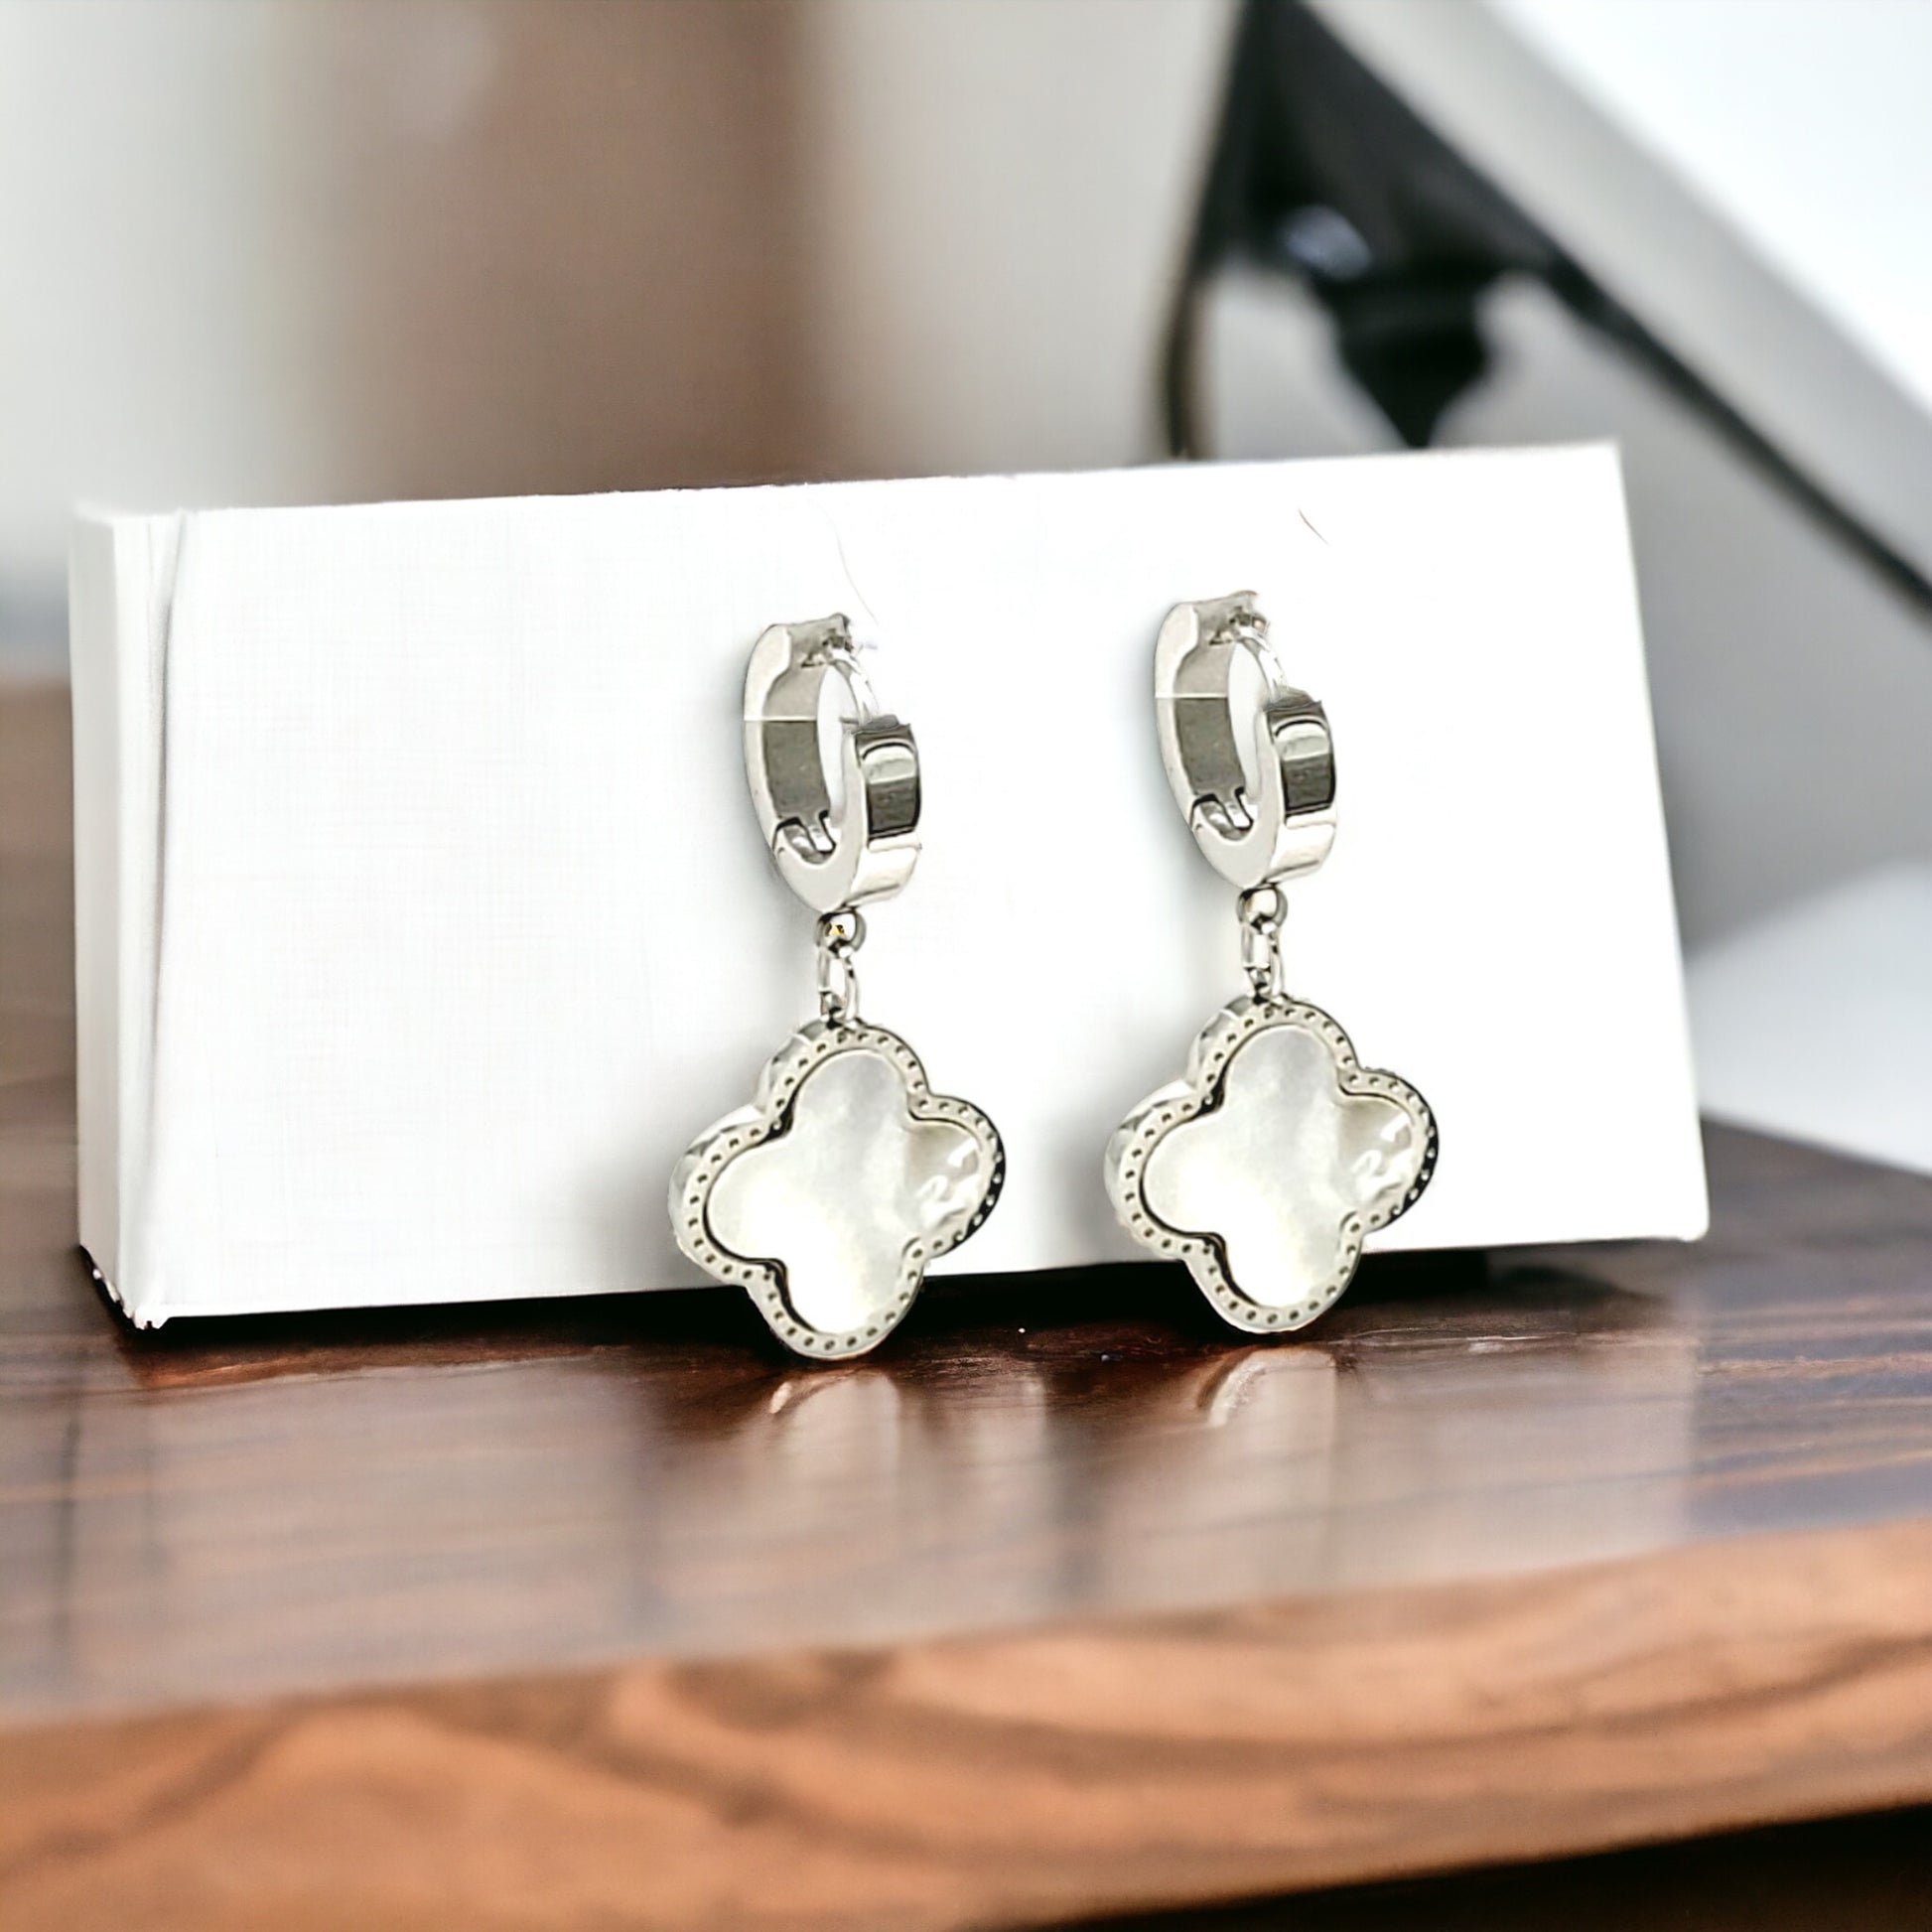 Silver Colored Clover Drop Earrings - Marisa's Shopping Network 